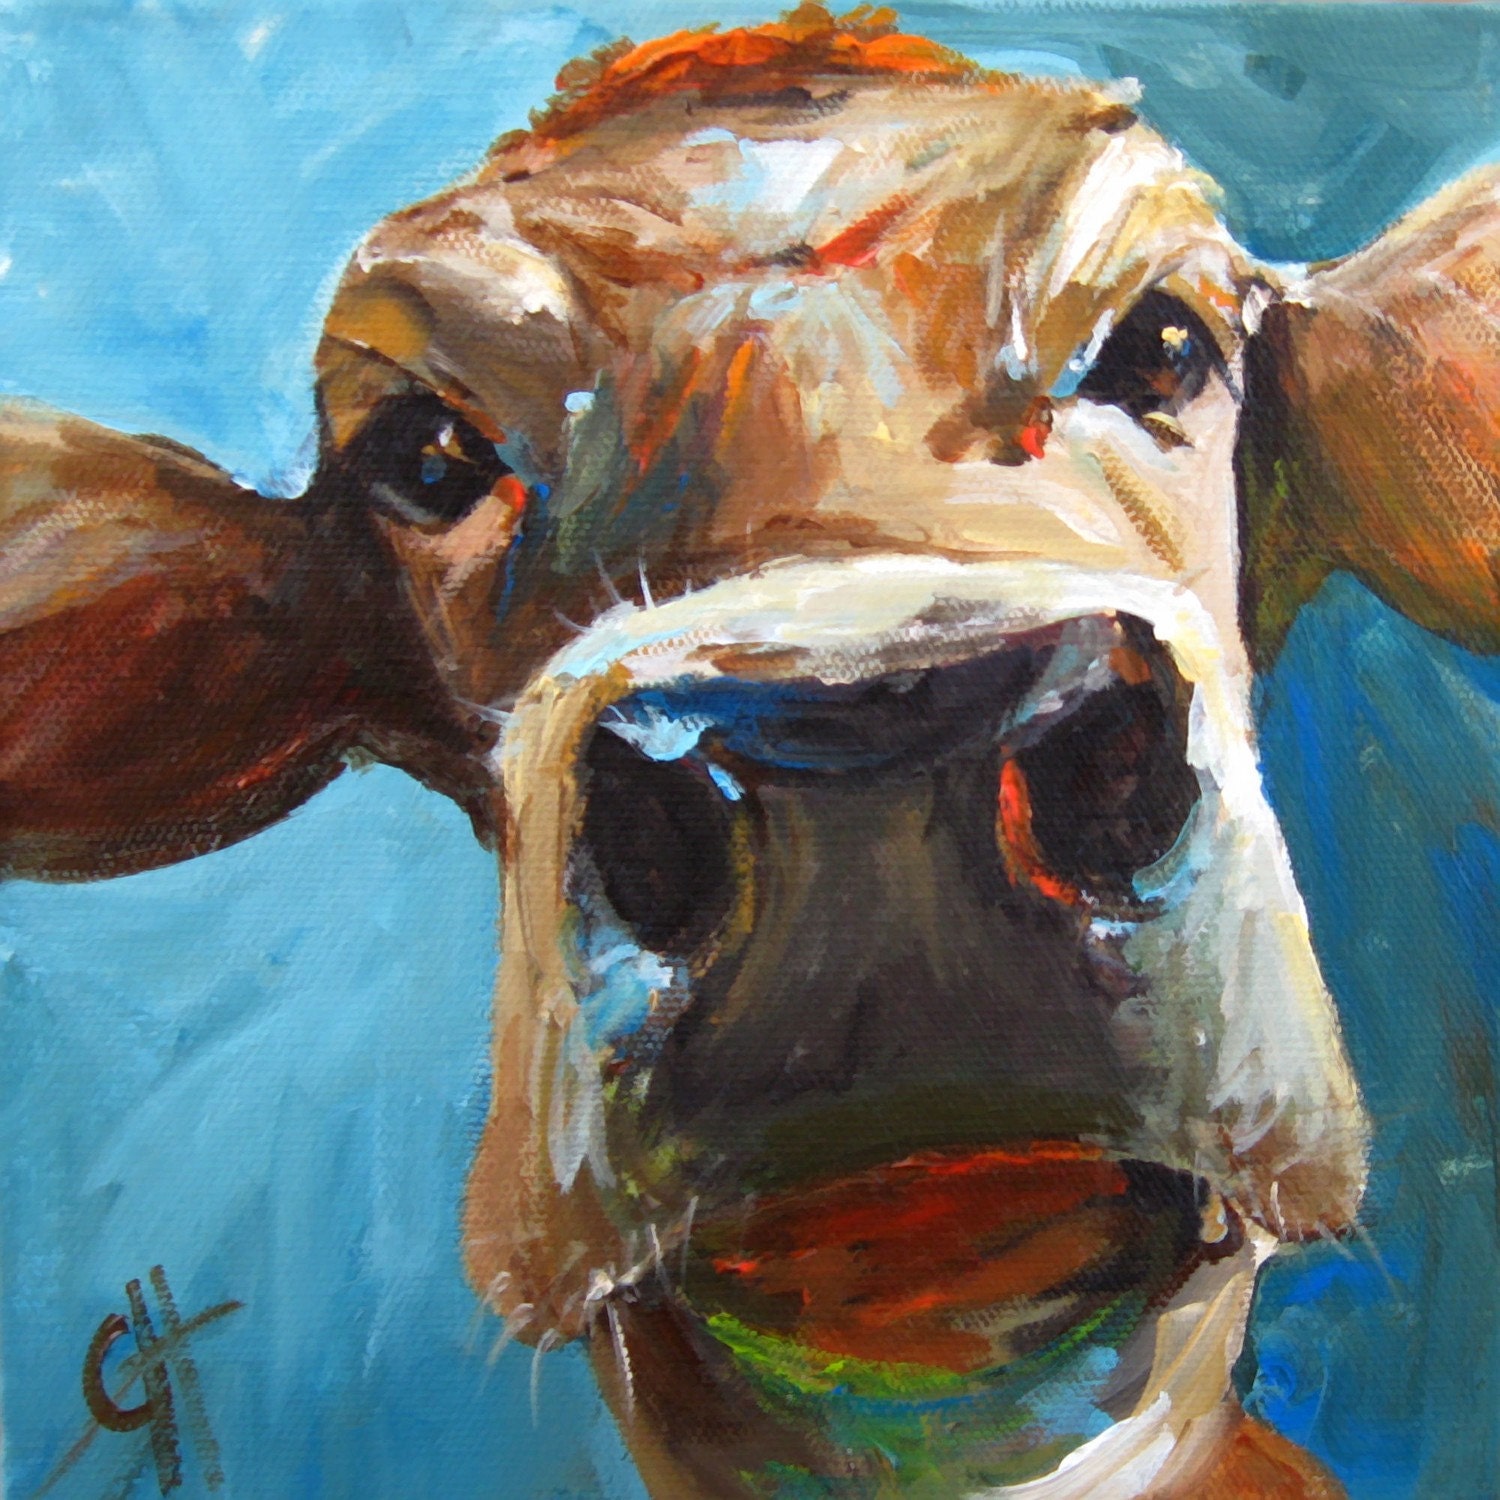 Elise the Cow - 7x7 Giclee Reproduction on stretched canvas